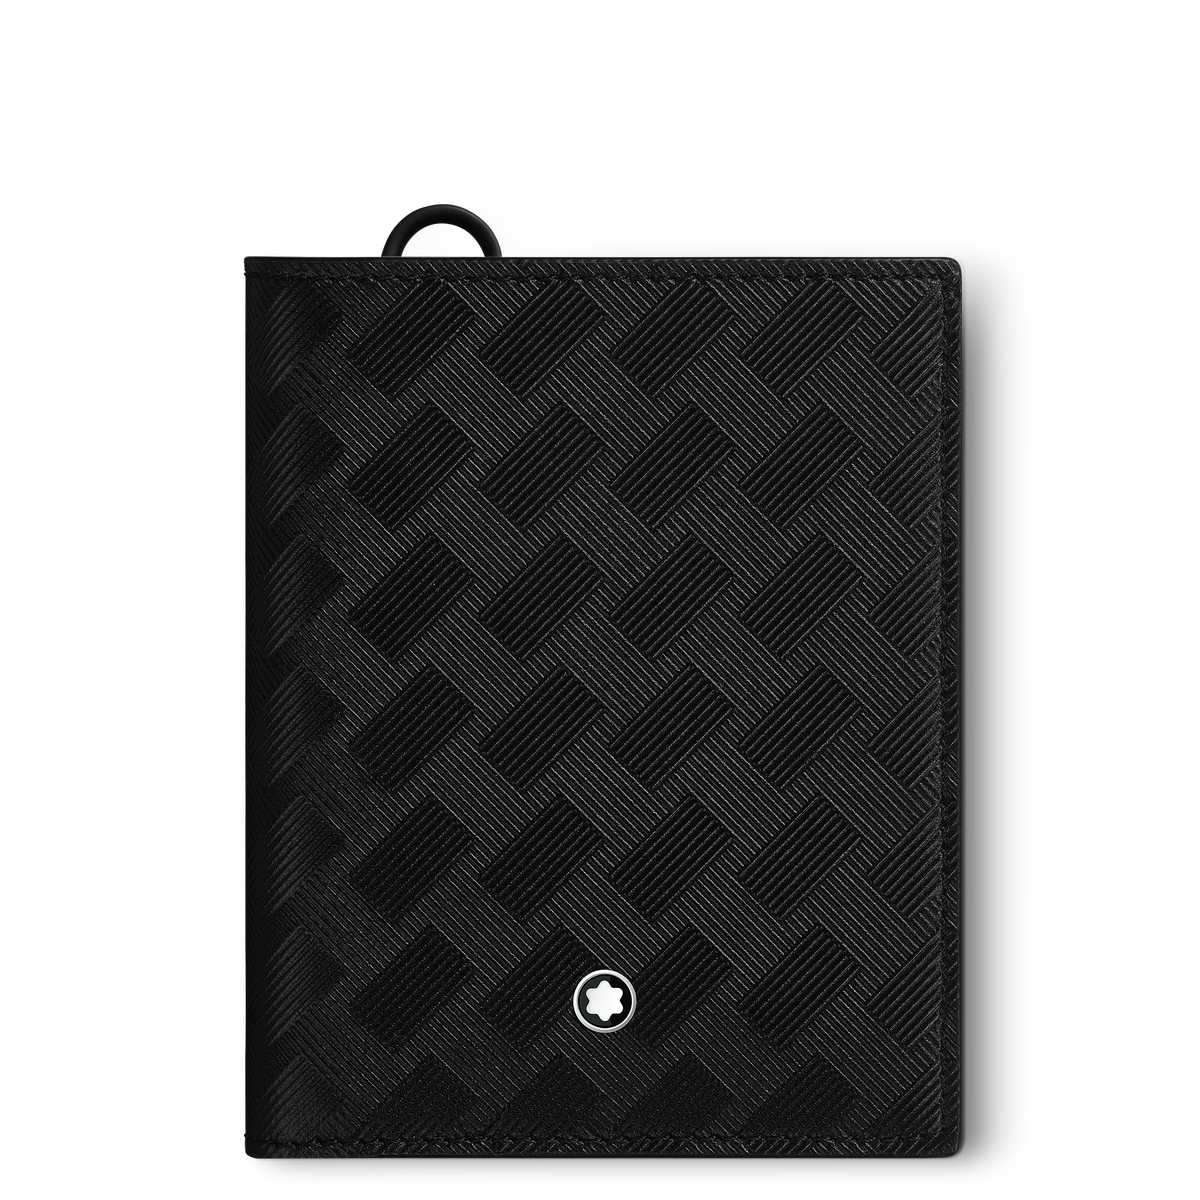 Montblanc Extreme 3.0 compact wallet 6cc